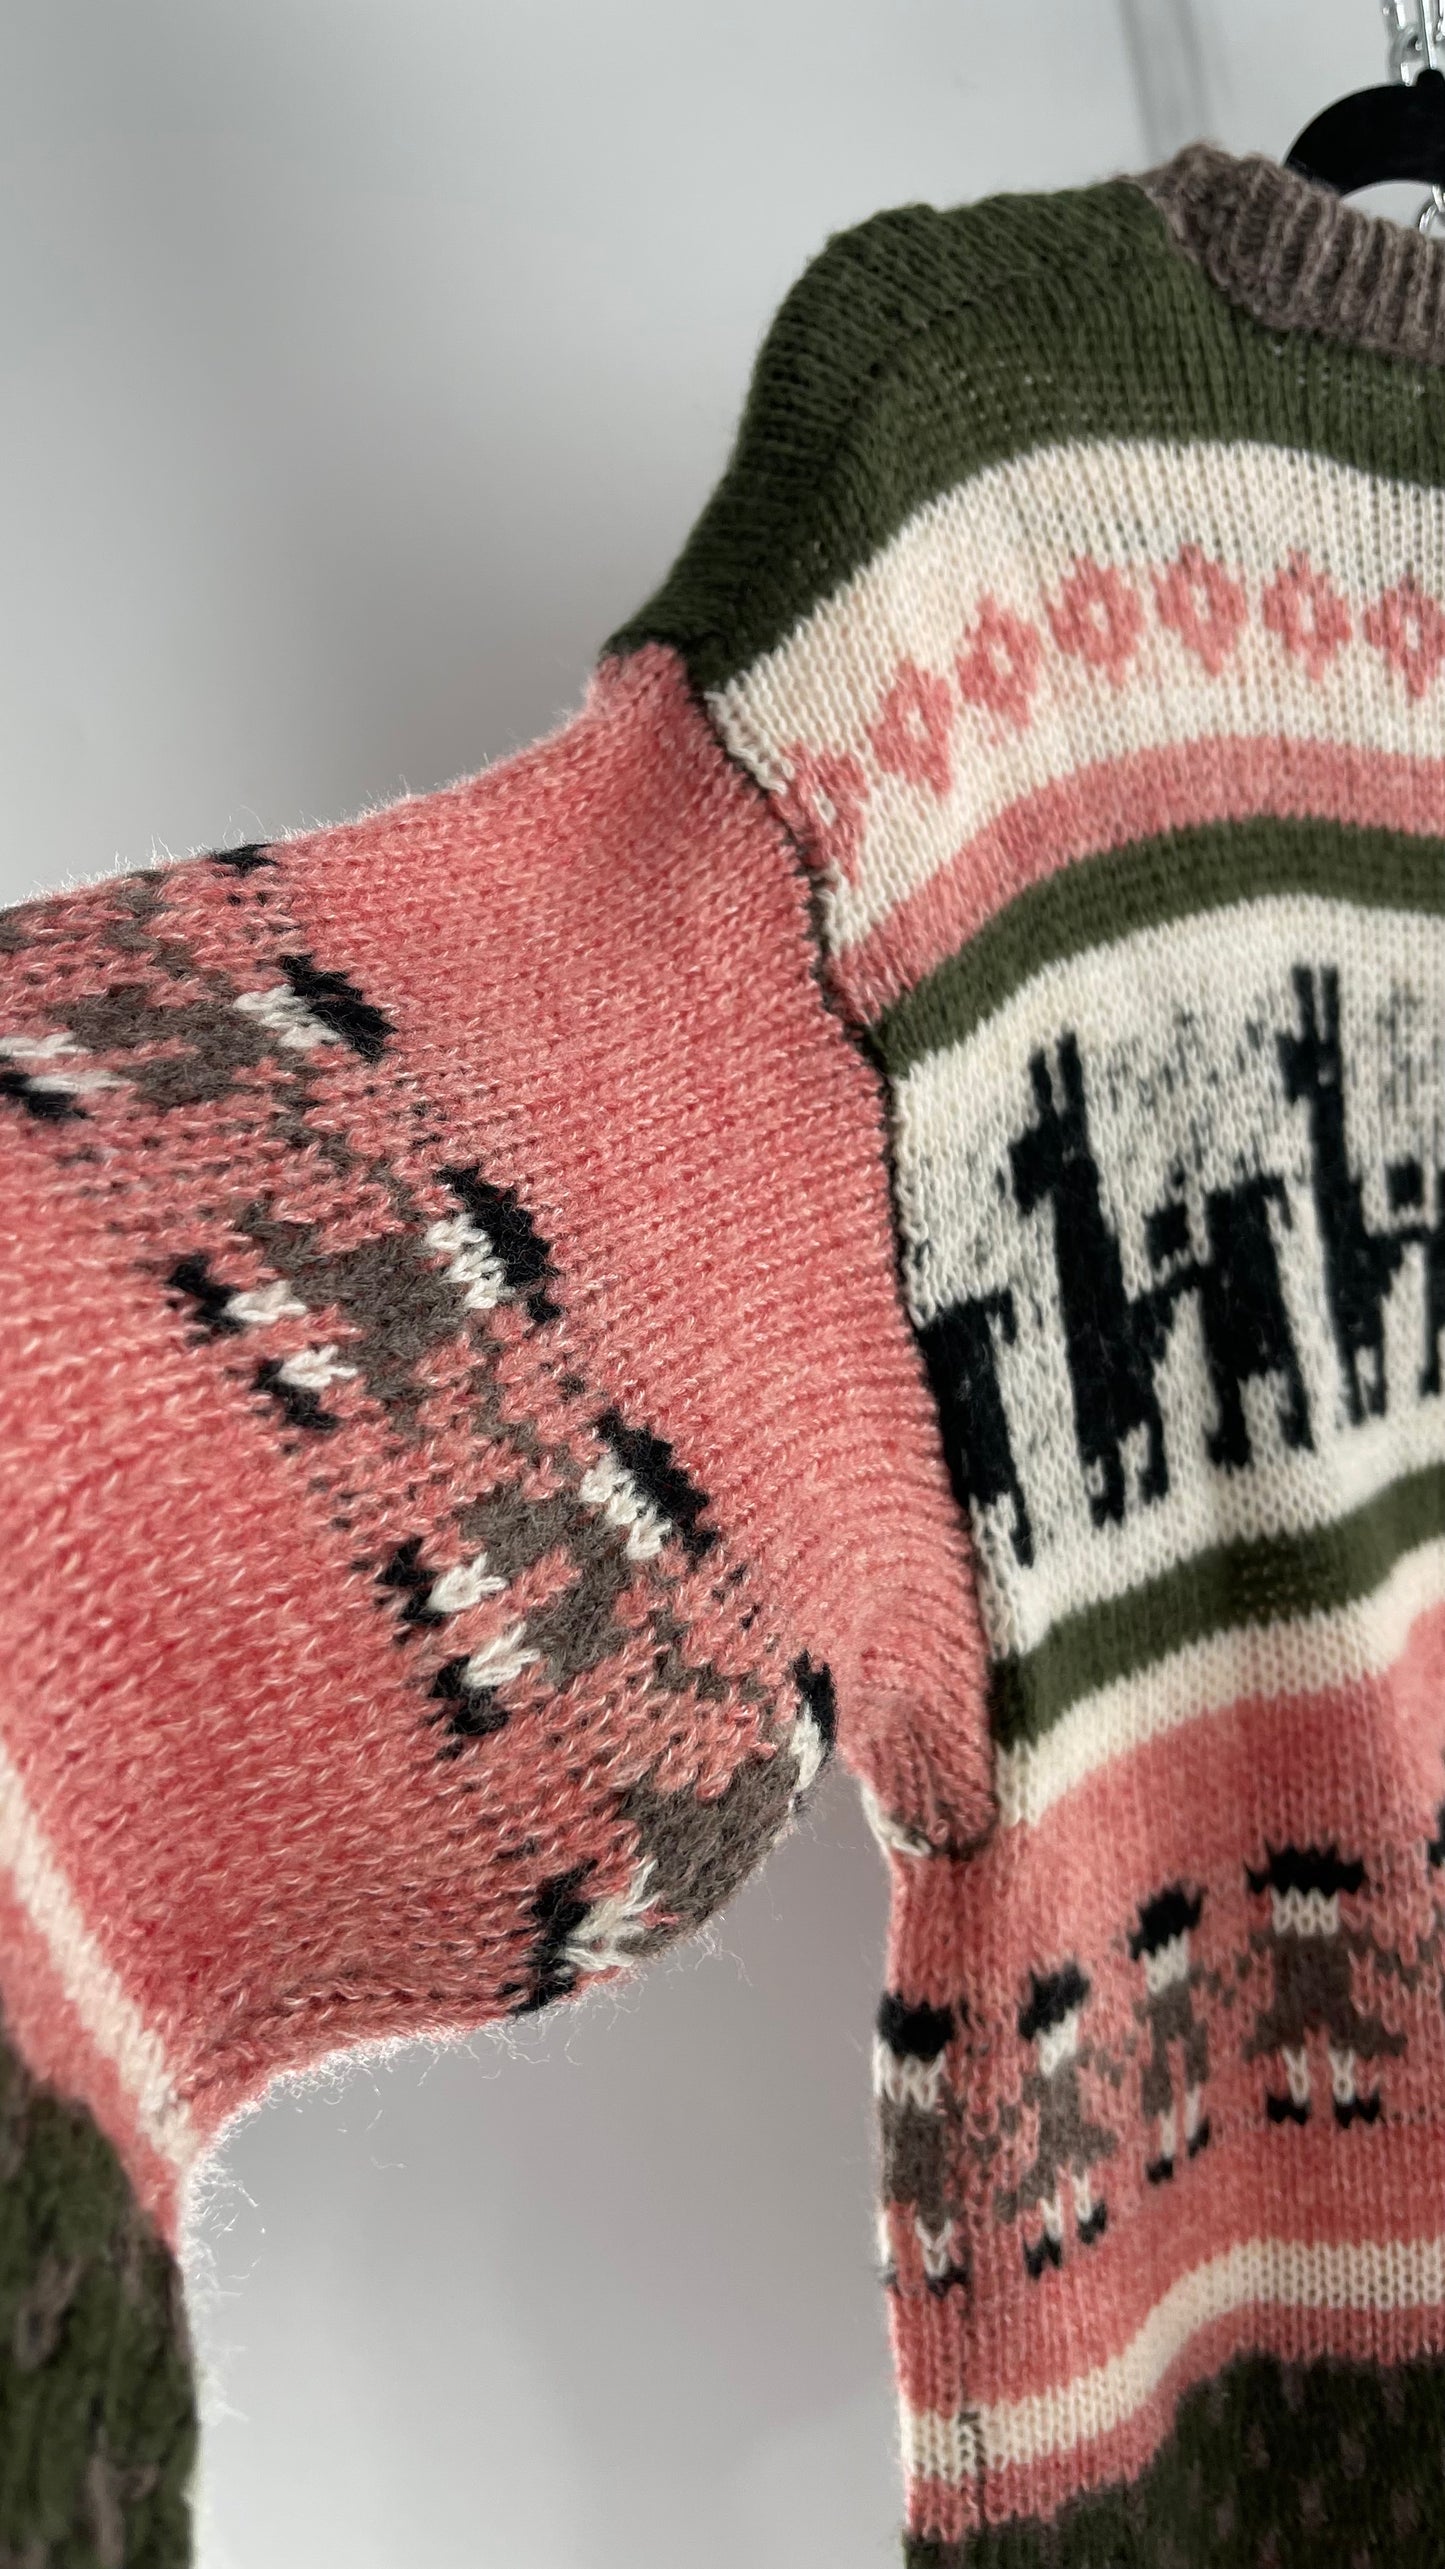 Cooke Collective Knit Llama/Alpaca Graphic Sweater with Army Green, Pink and White Colorway (Medium)